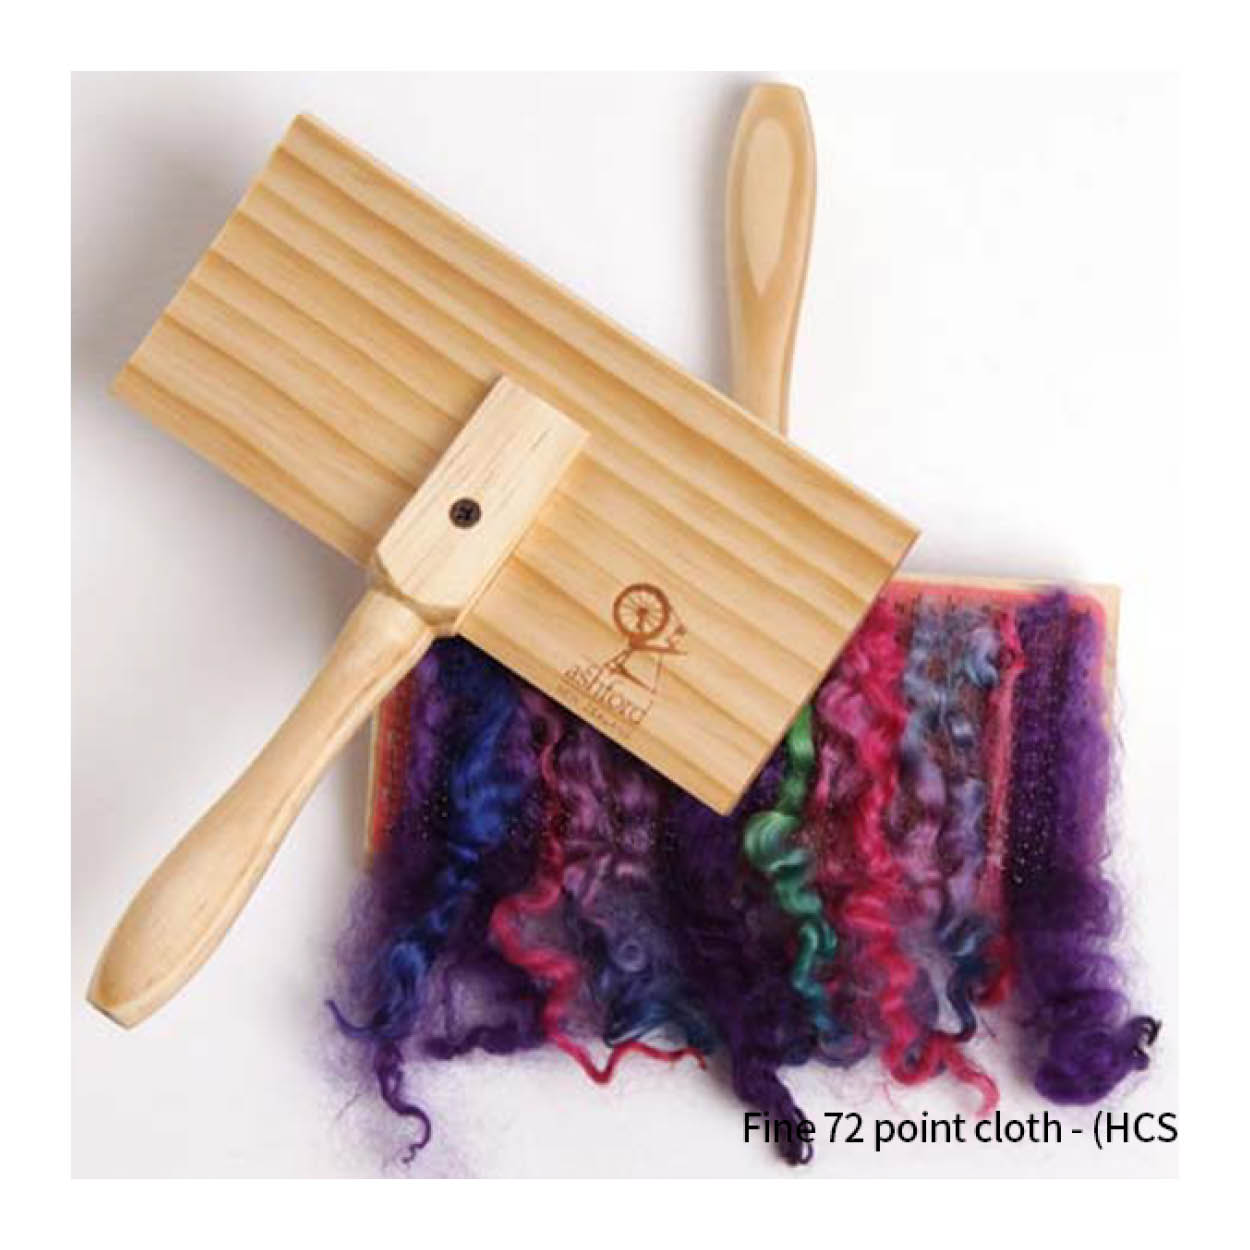 Hand Carders & Drum Carders Explained - The Good Yarn